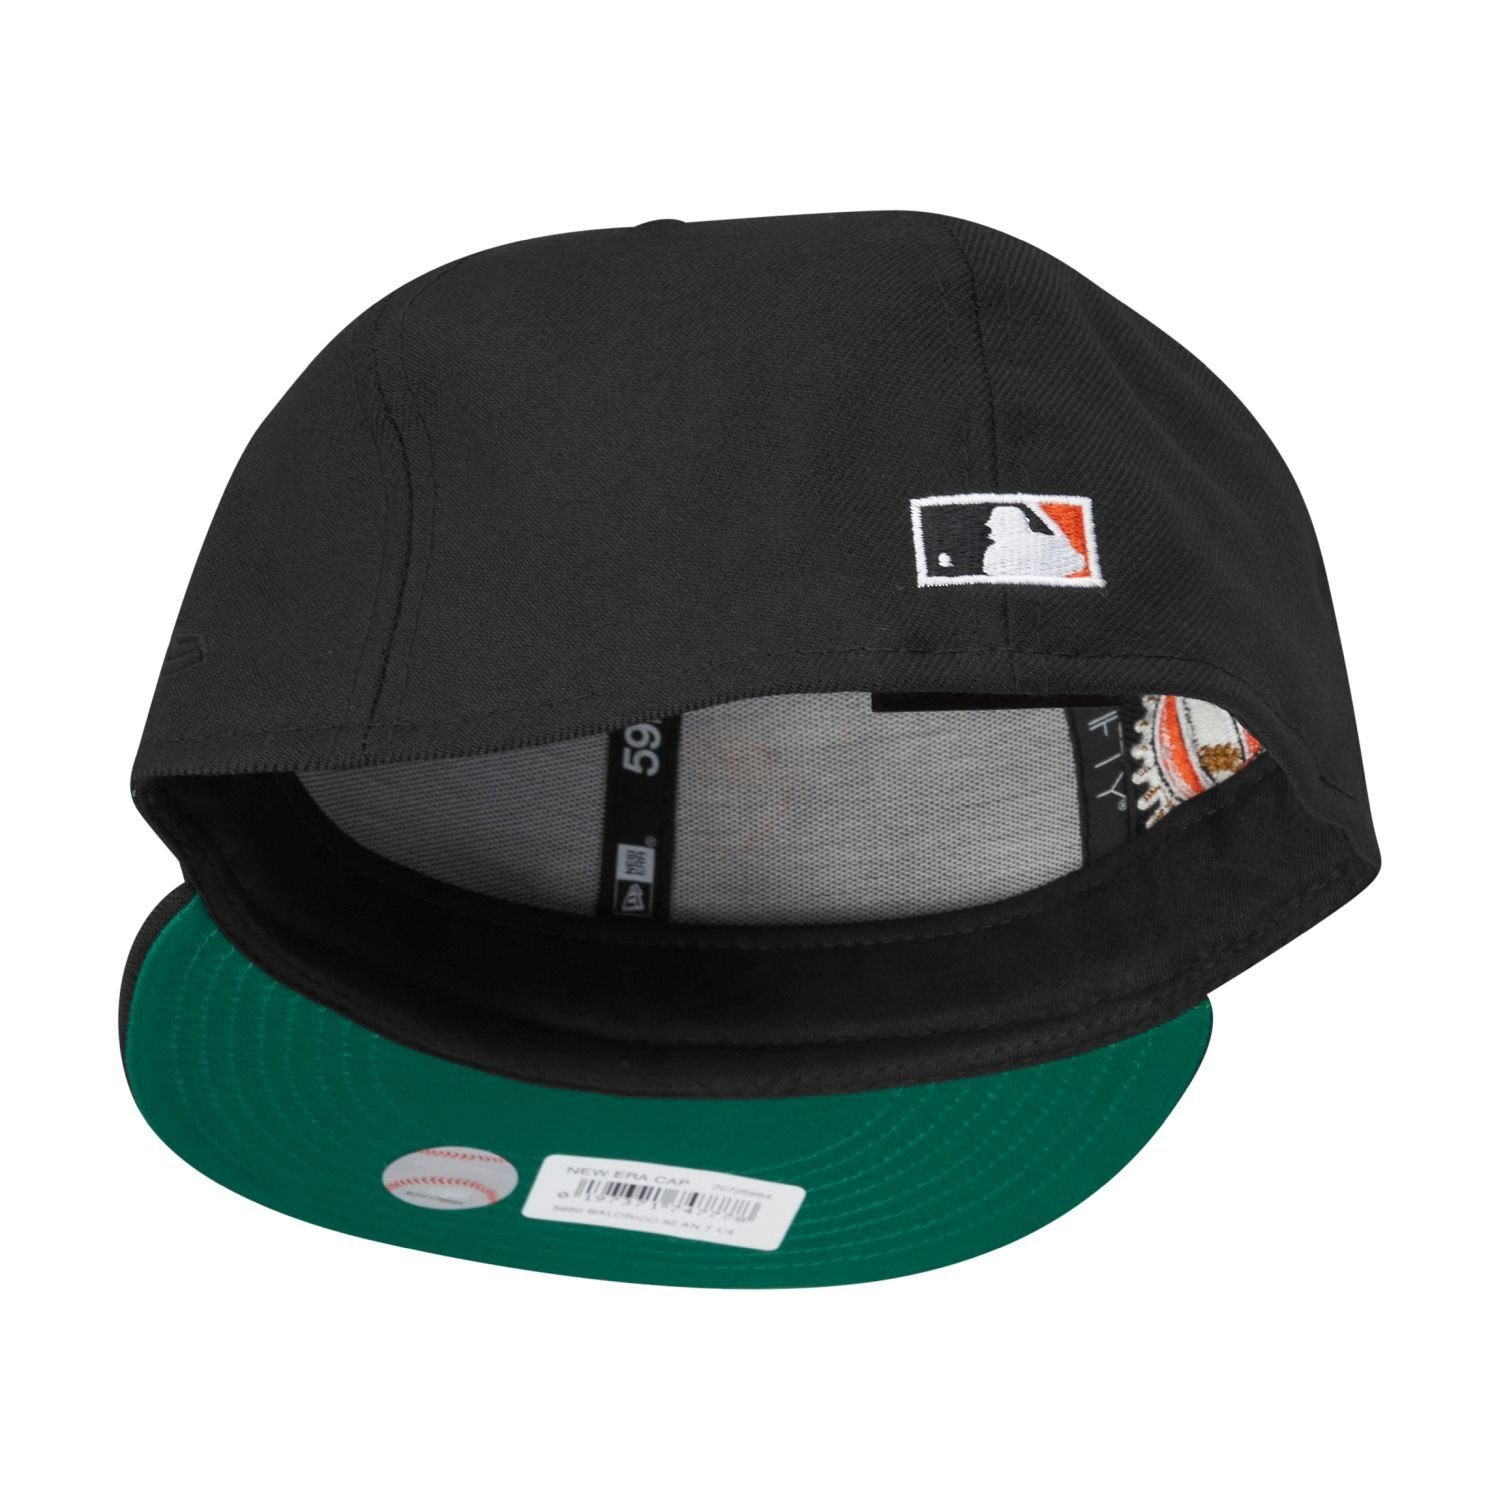 Fitted Baltimore Orioles COOPERSTOWN Cap New Era 59Fifty